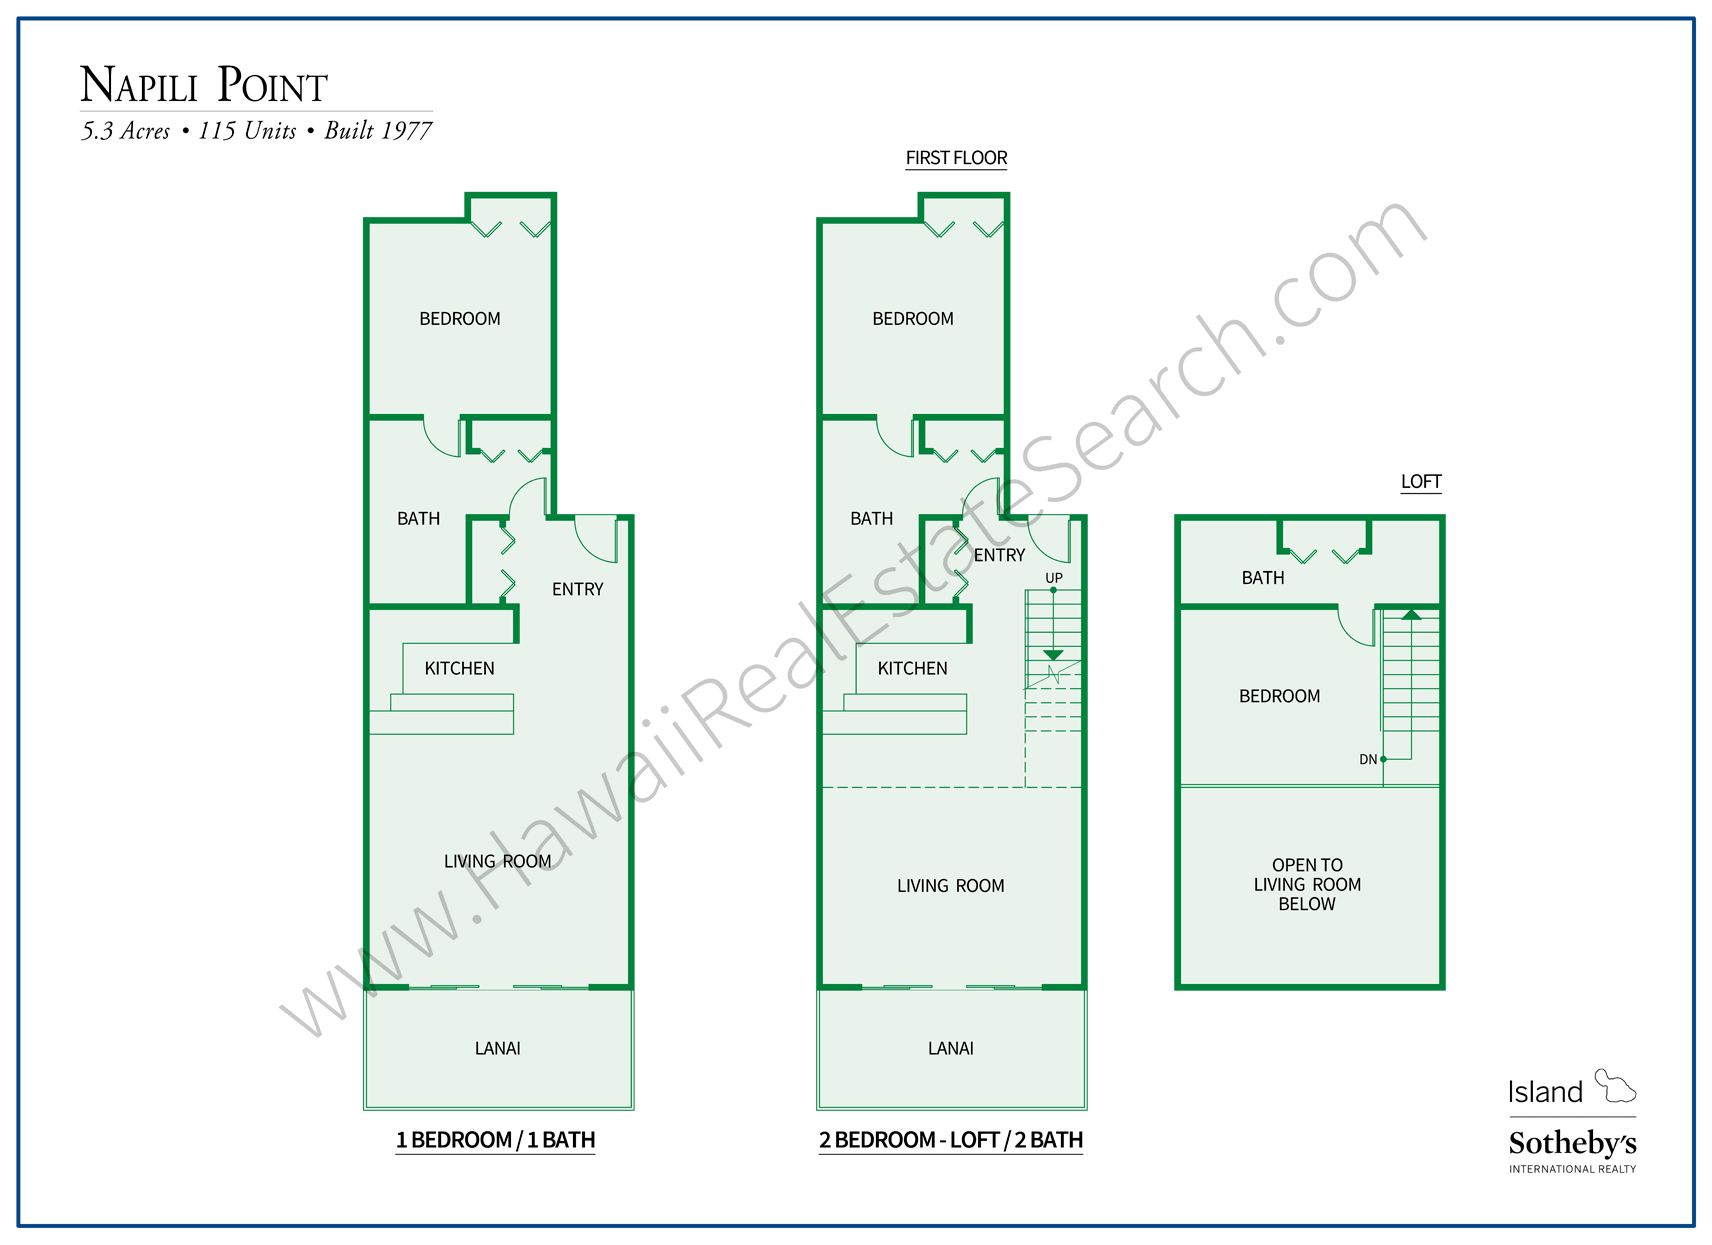 Napili Point Floor Plans Updated 2018